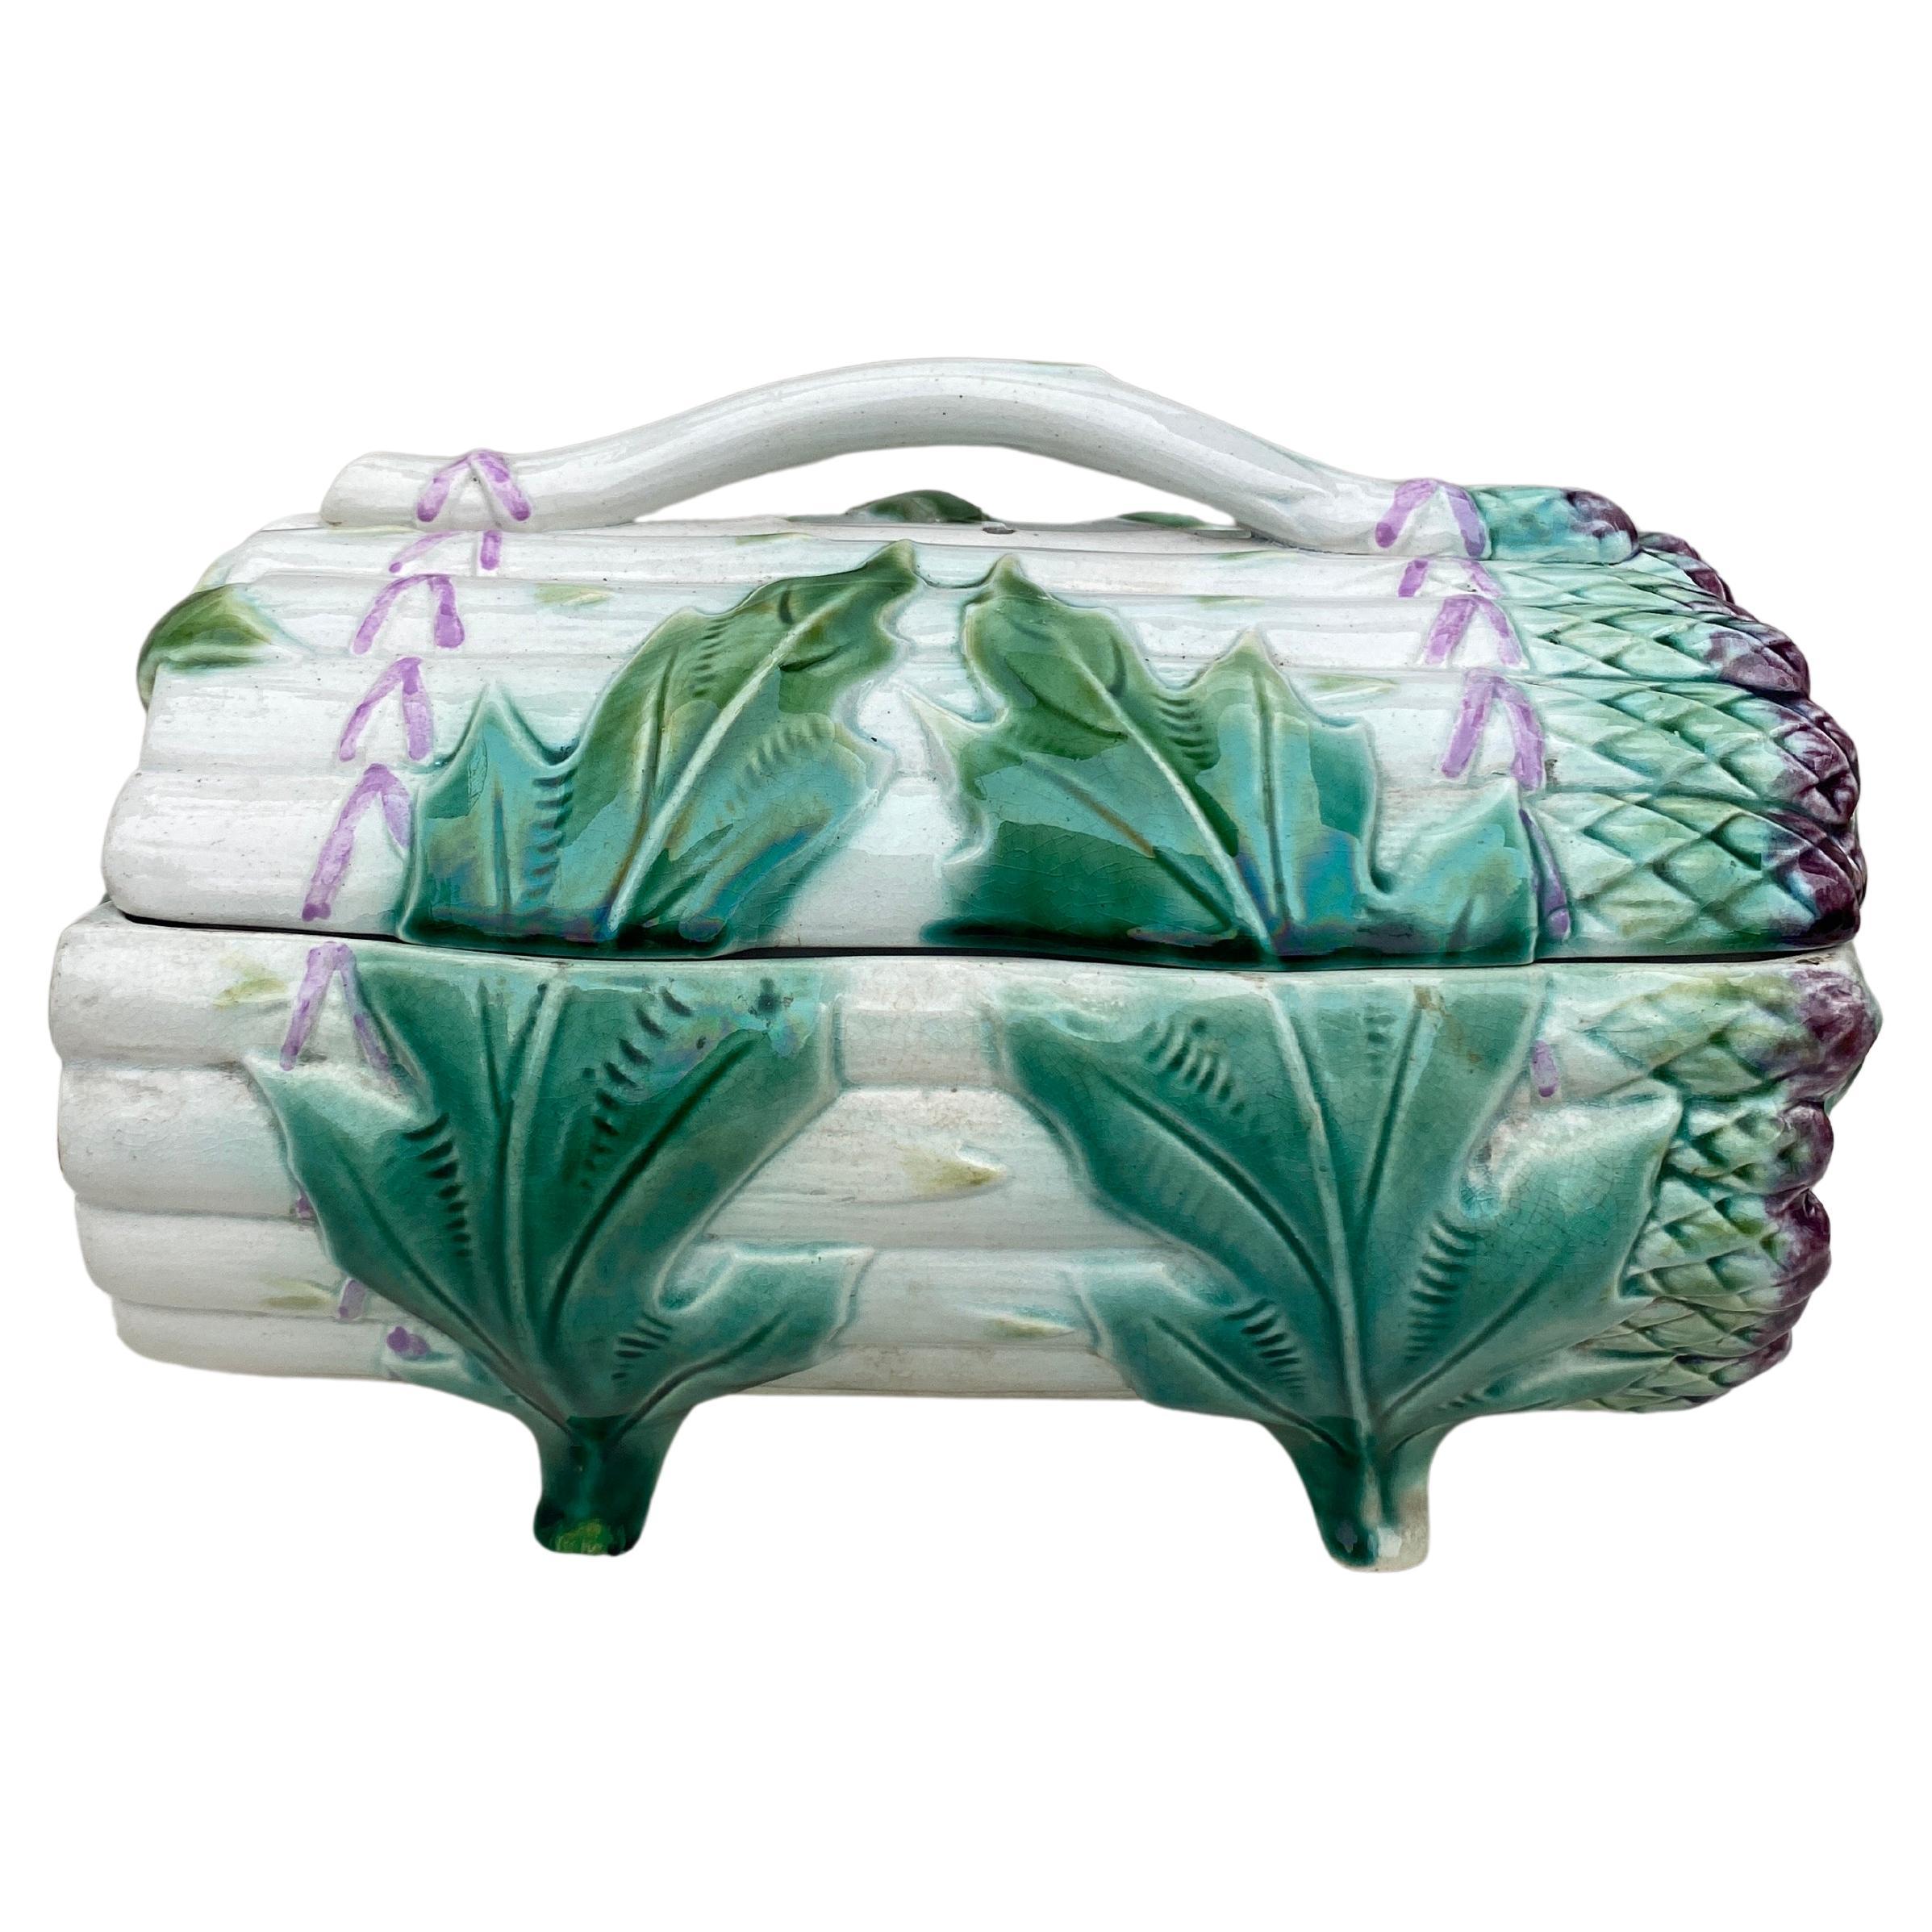 This French Majolica footed tureen is a bunch of asparagus surrounded by large artichoke leaves  is one of the rare example of asparagus tureens made at the end of 19th century.
At this period, almost all the French manufactures produced asparagus